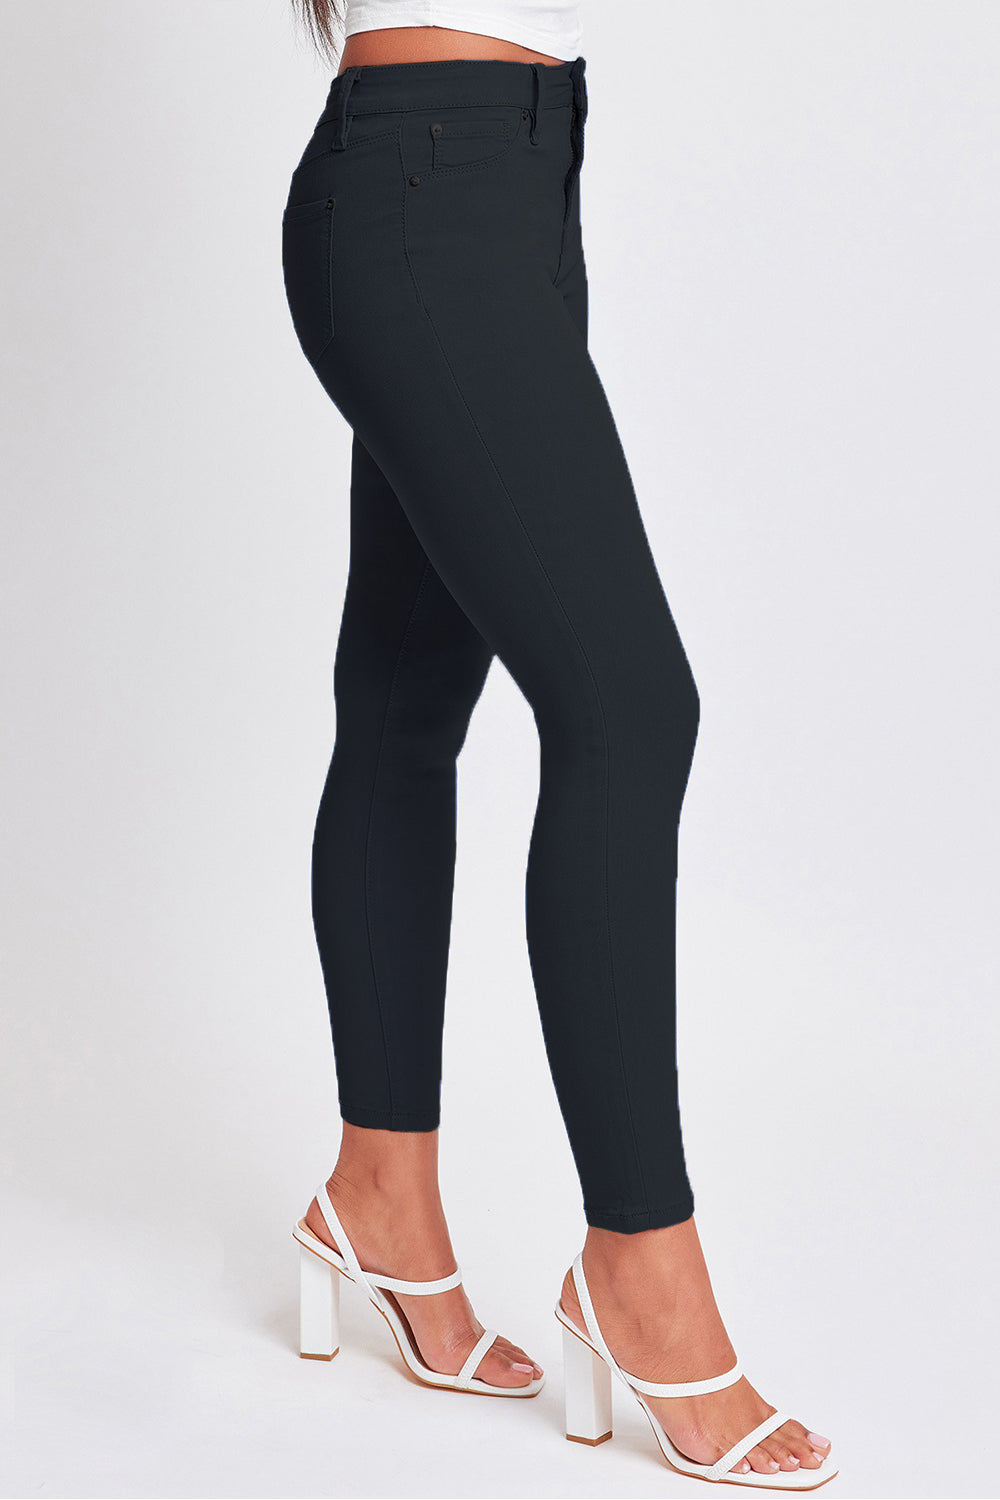 Hyperstretch Mid-Rise Skinny Pants - Black